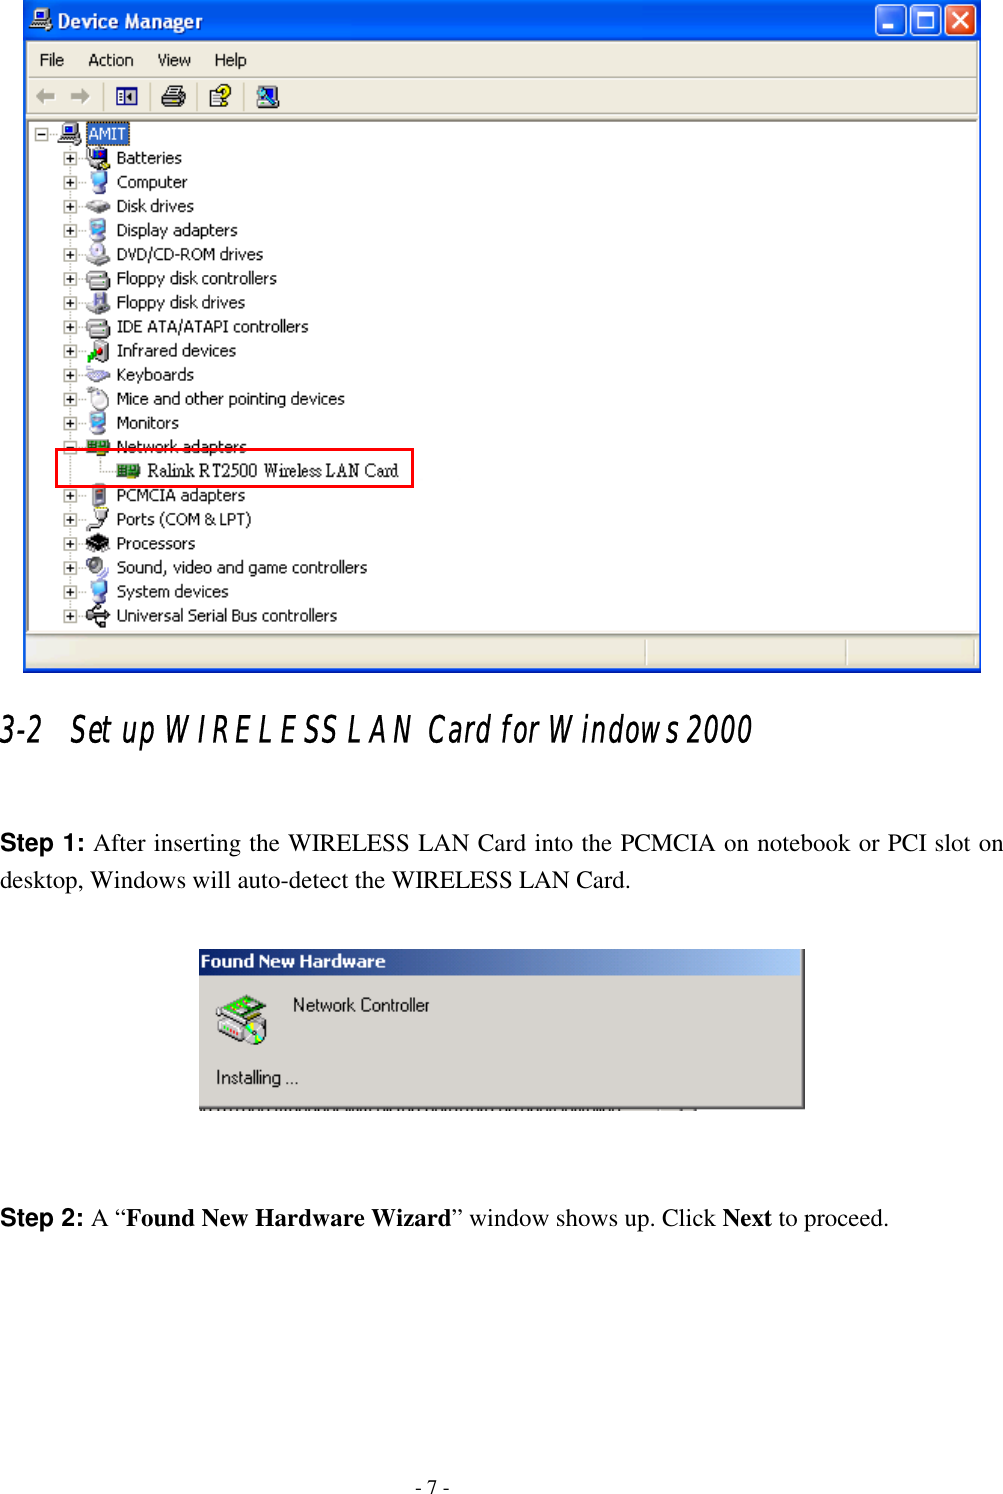   3-2   Set up WIRELESS LAN Card for Windows 2000  Step 1: After inserting the WIRELESS LAN Card into the PCMCIA on notebook or PCI slot on desktop, Windows will auto-detect the WIRELESS LAN Card.     Step 2: A “Found New Hardware Wizard” window shows up. Click Next to proceed.    - 7 - 